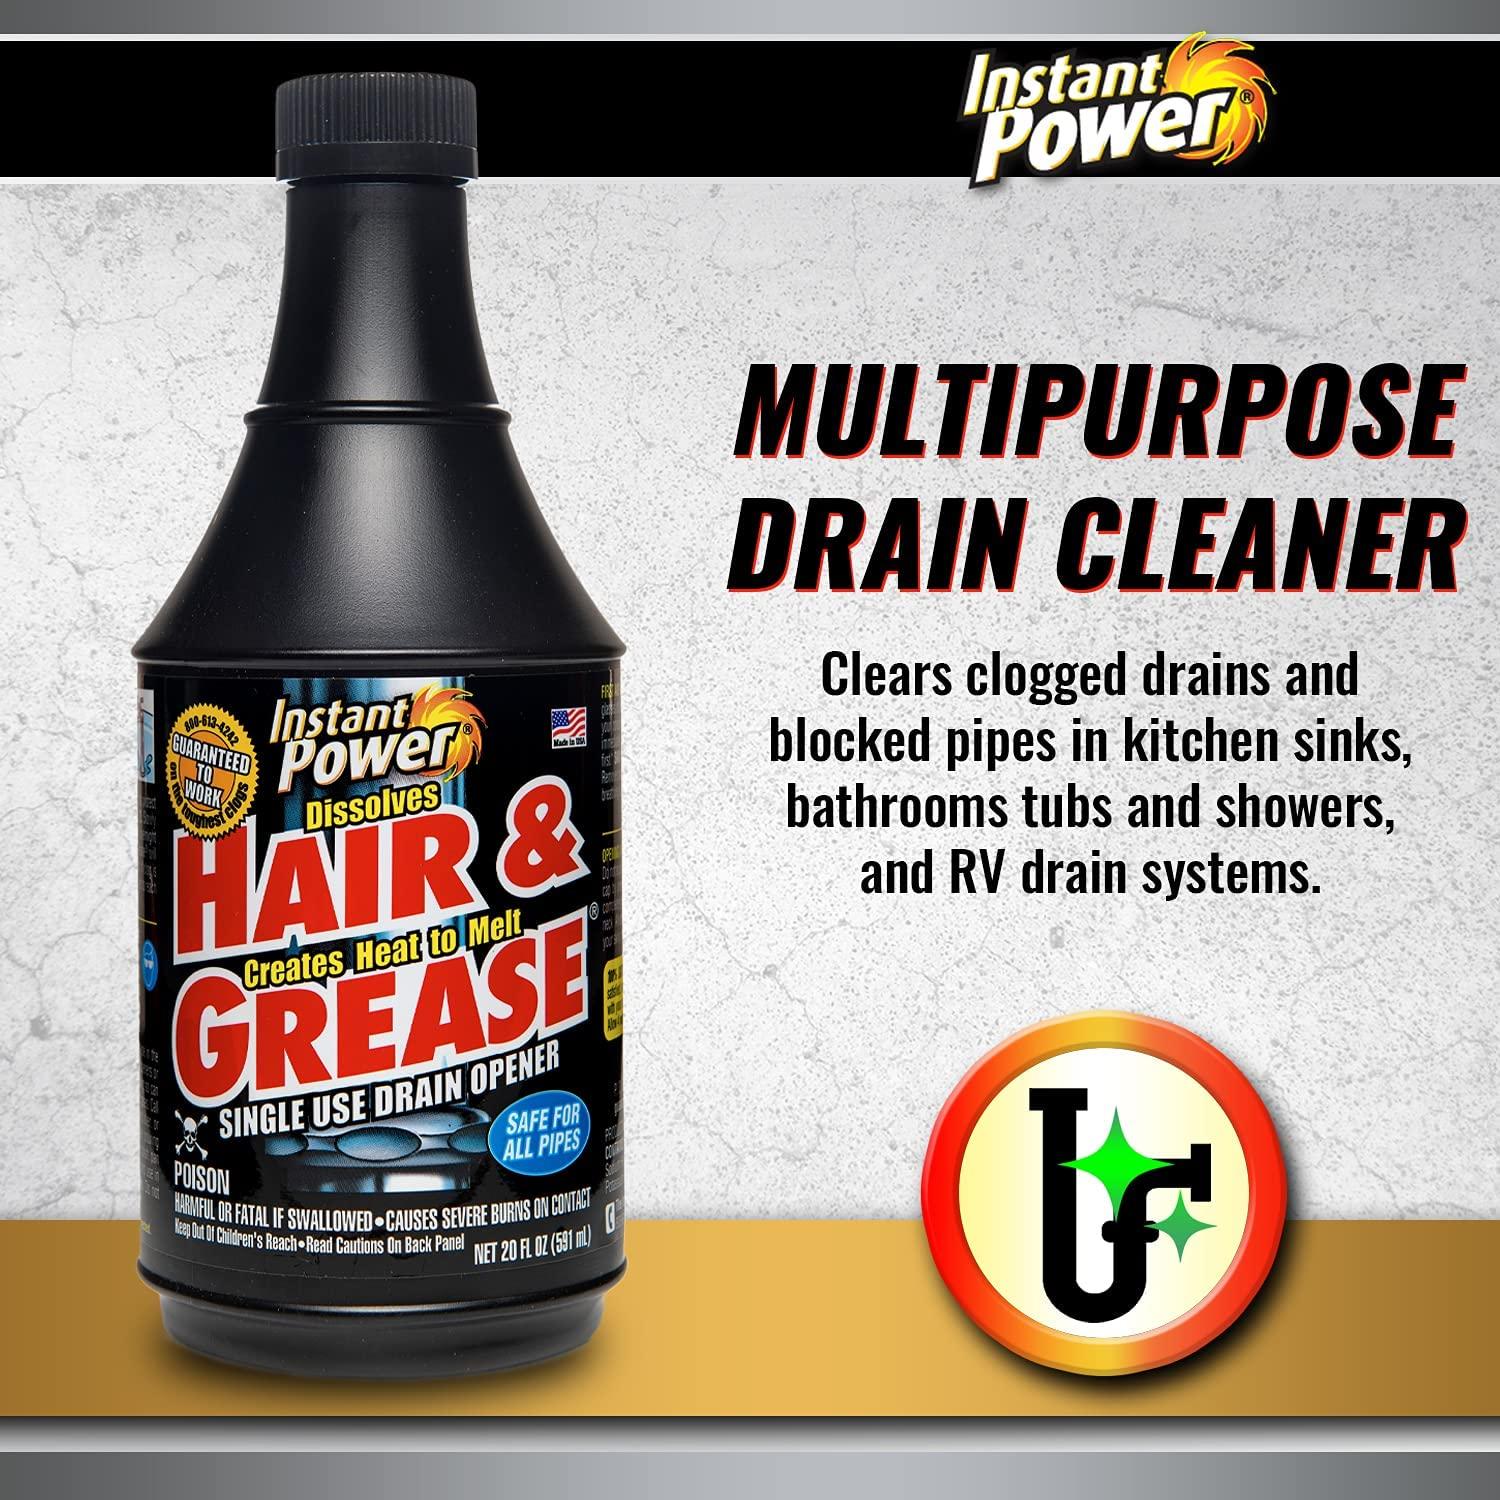 Instant Power Hair and Grease Drain Opener, Liquid Drain Cleaner